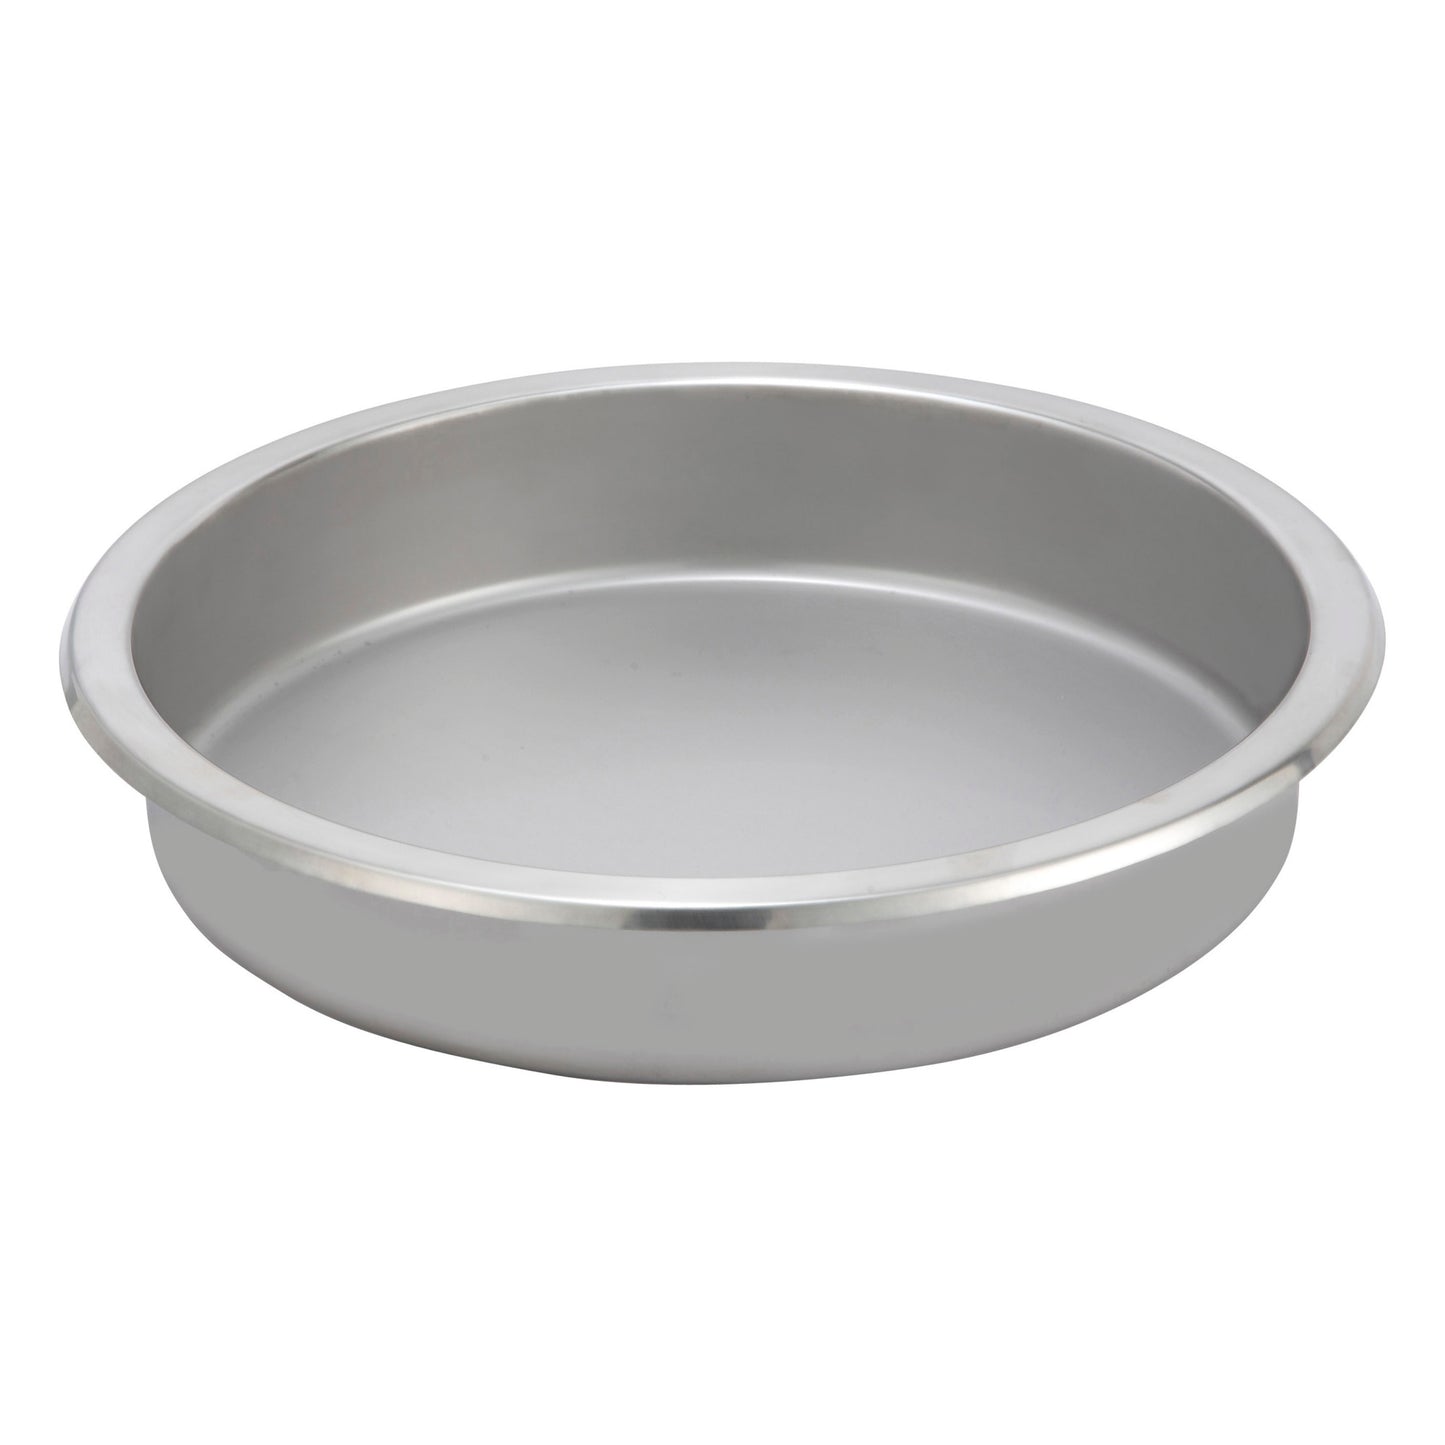 602-FP - Food Pan for 103A, 103B, 308A, and 602